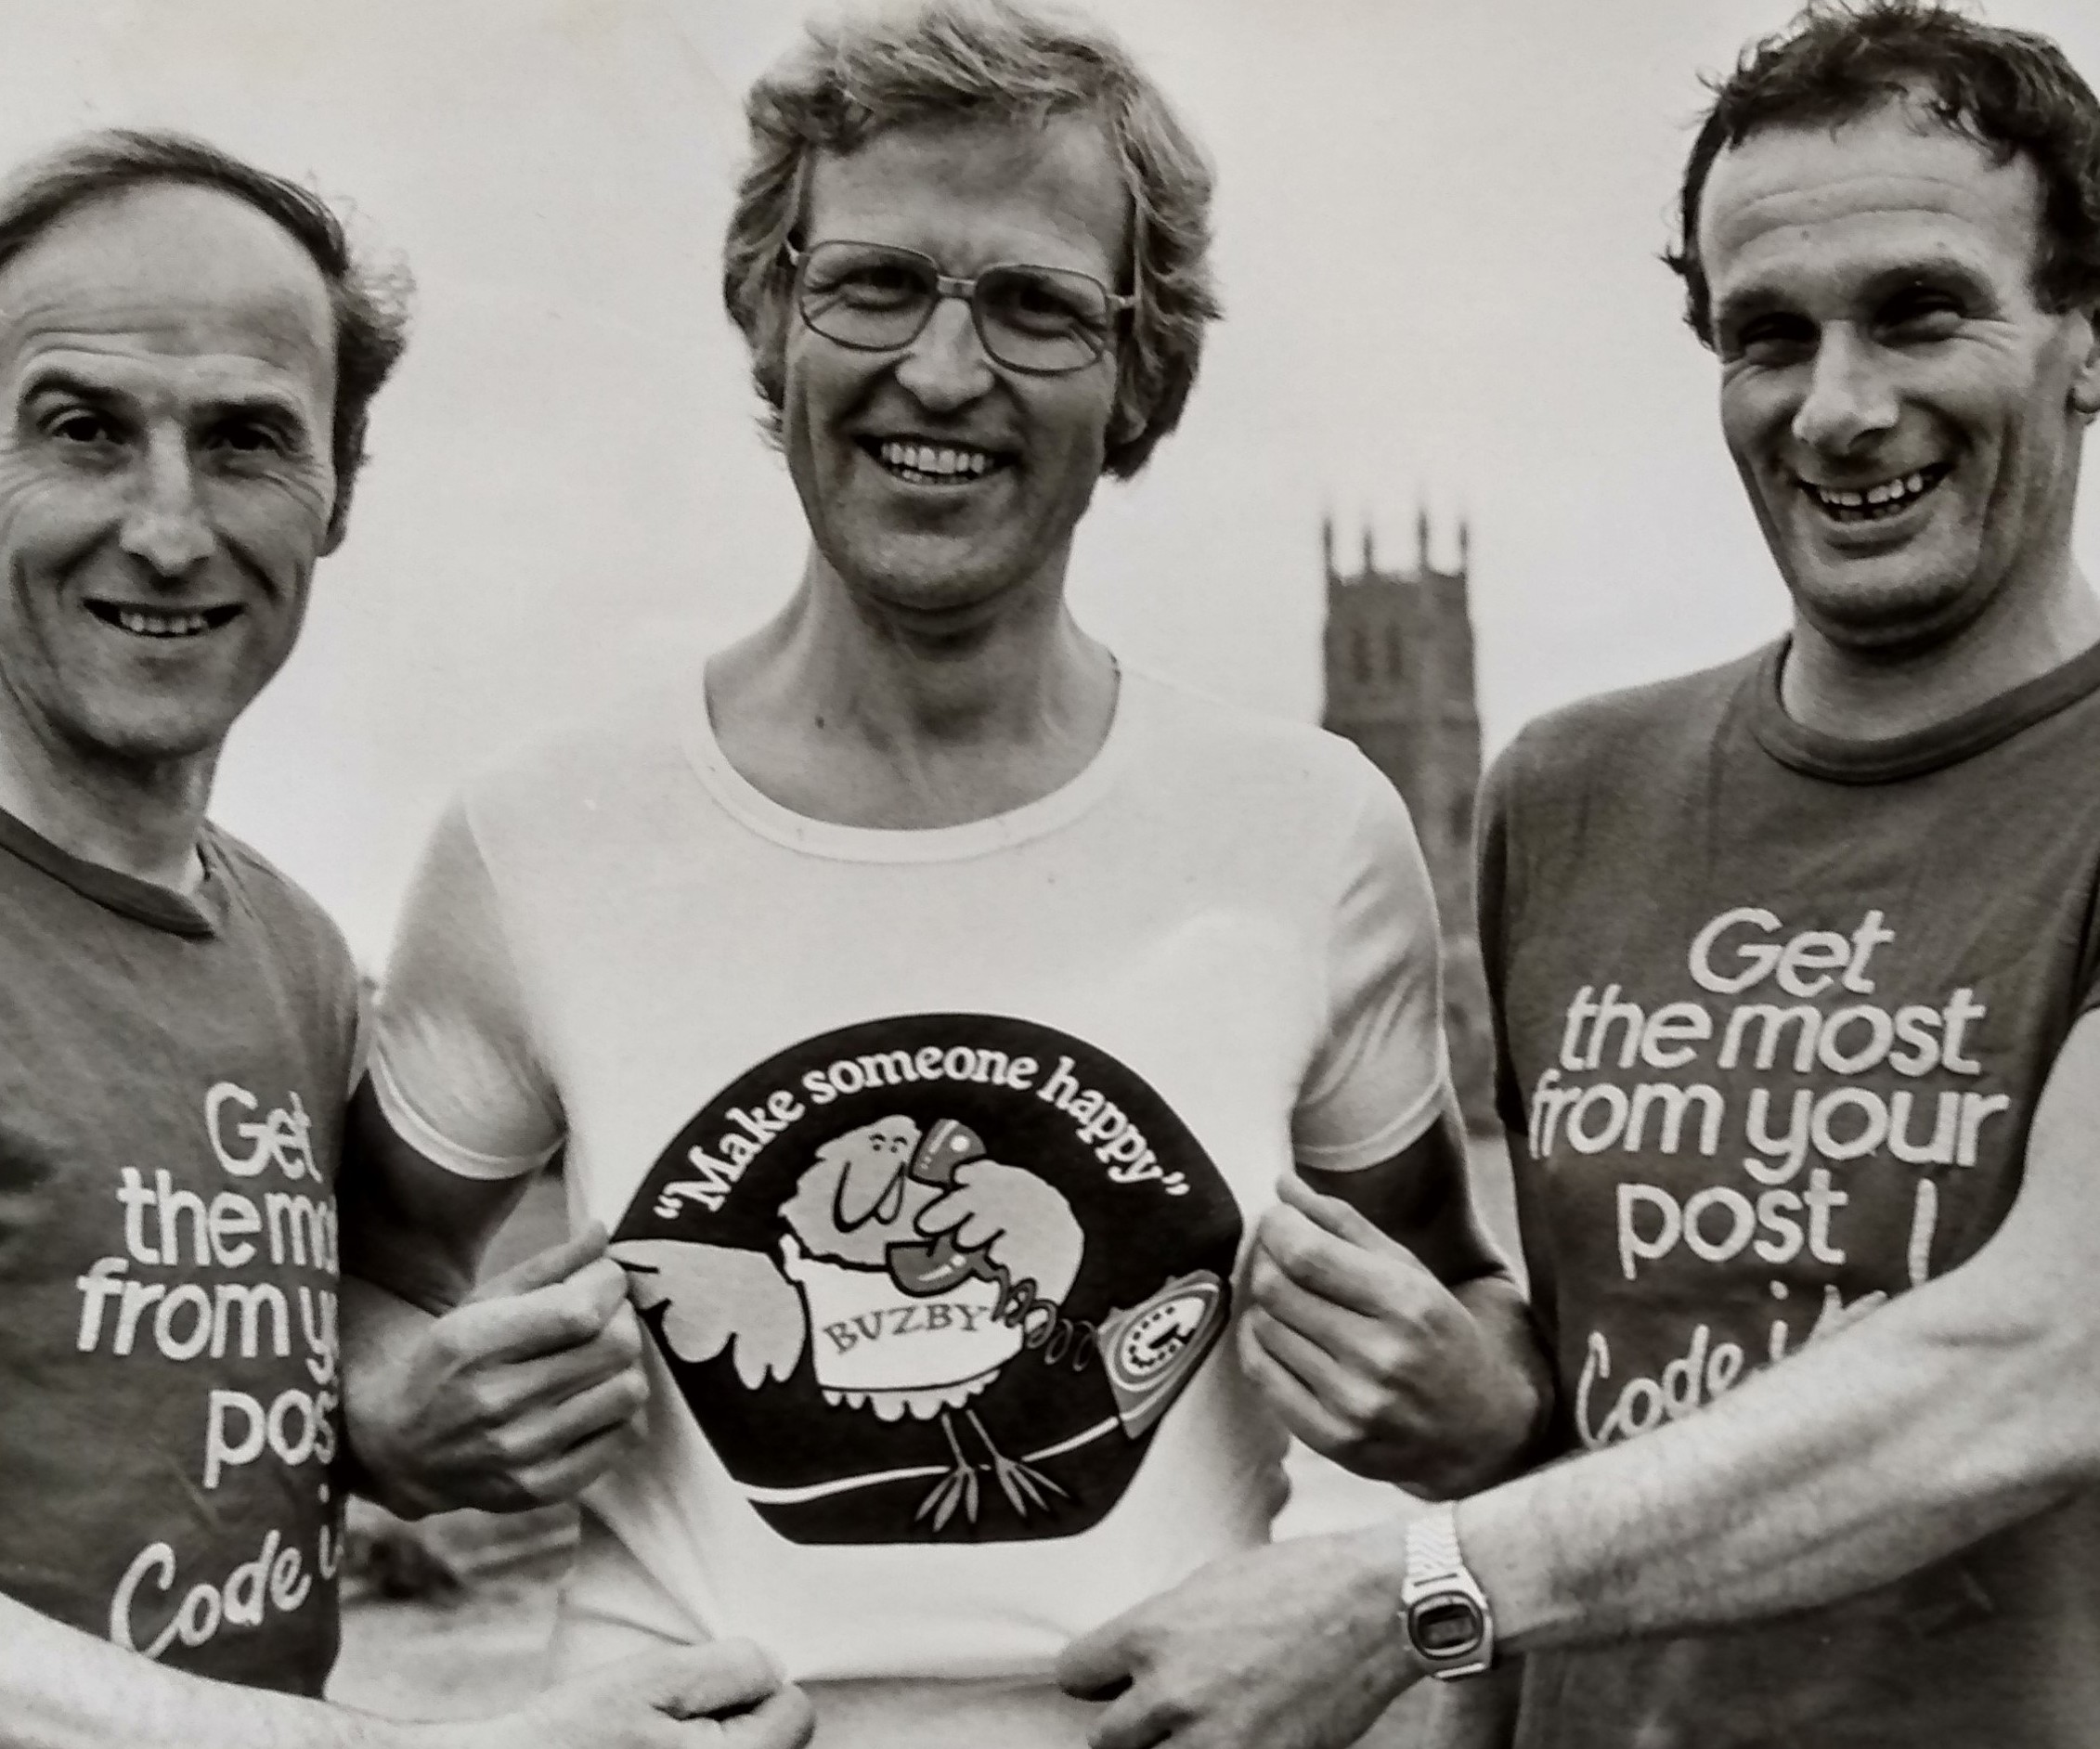 From left, Wilf Bates, Roger Cox and Mike Butler, complete with snazzy T-shirts, were ready to compete in the Post Office marathon in October 1980